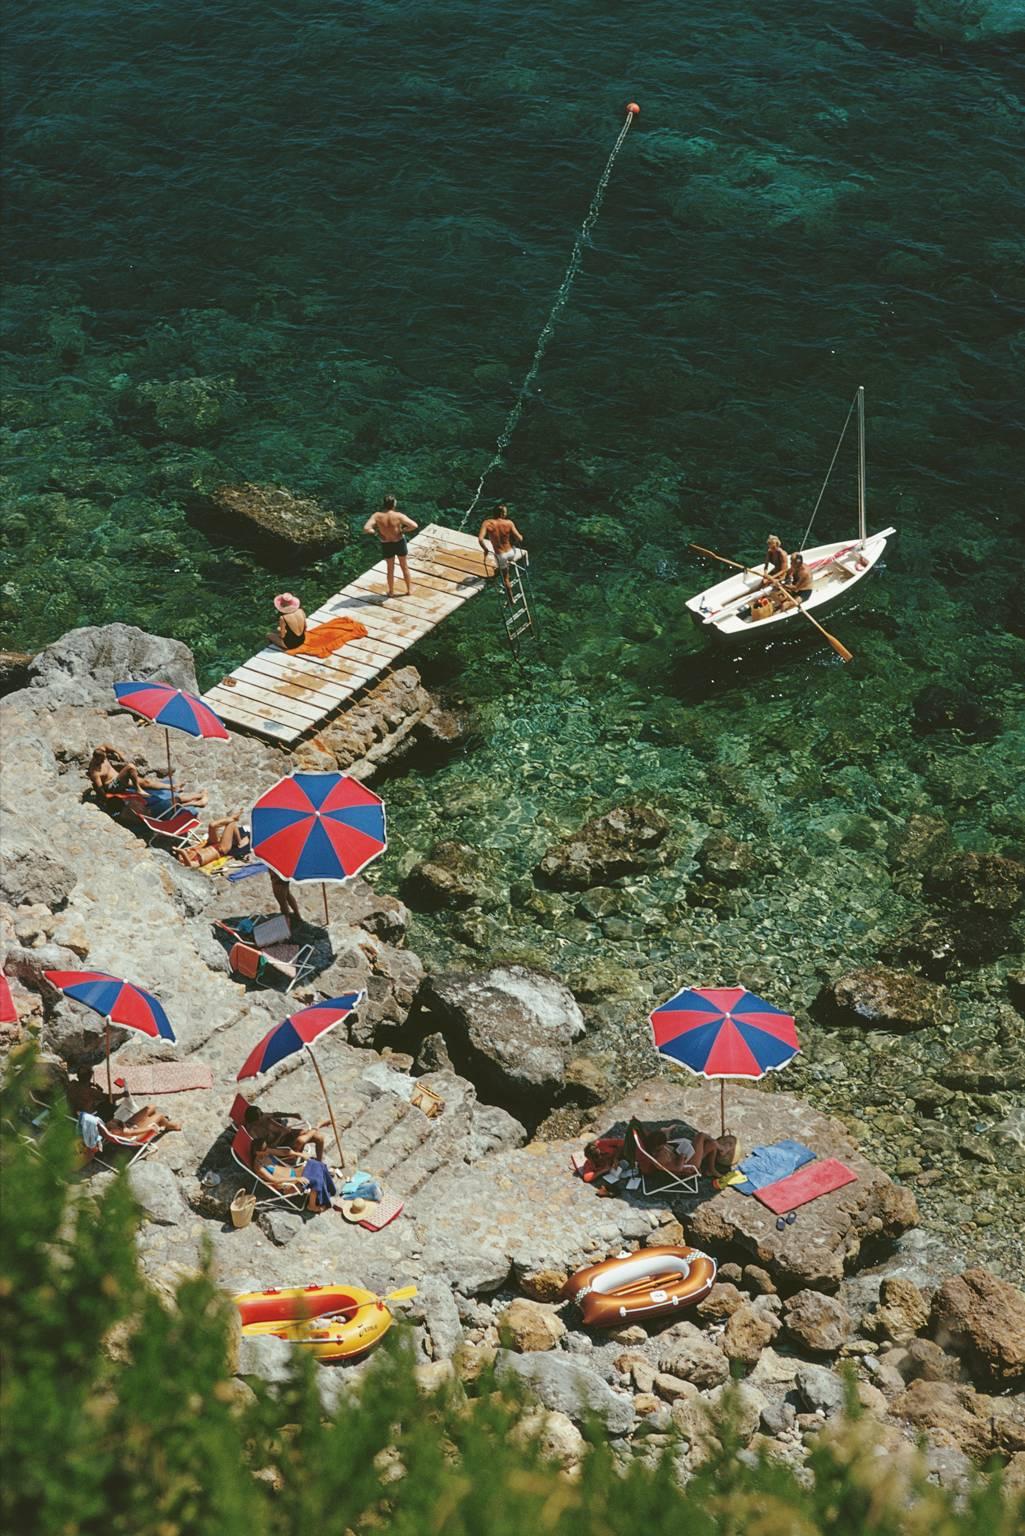 'Porto Ercole' by Slim Aarons

A jetty juts out from the rocky shoreline at the Hotel Il Pellicano in Porto Ercole, Tuscany, August 1973.

Beautiful greens of the sea water contrast with the red and blue parasols, gorgeous light, you can almost